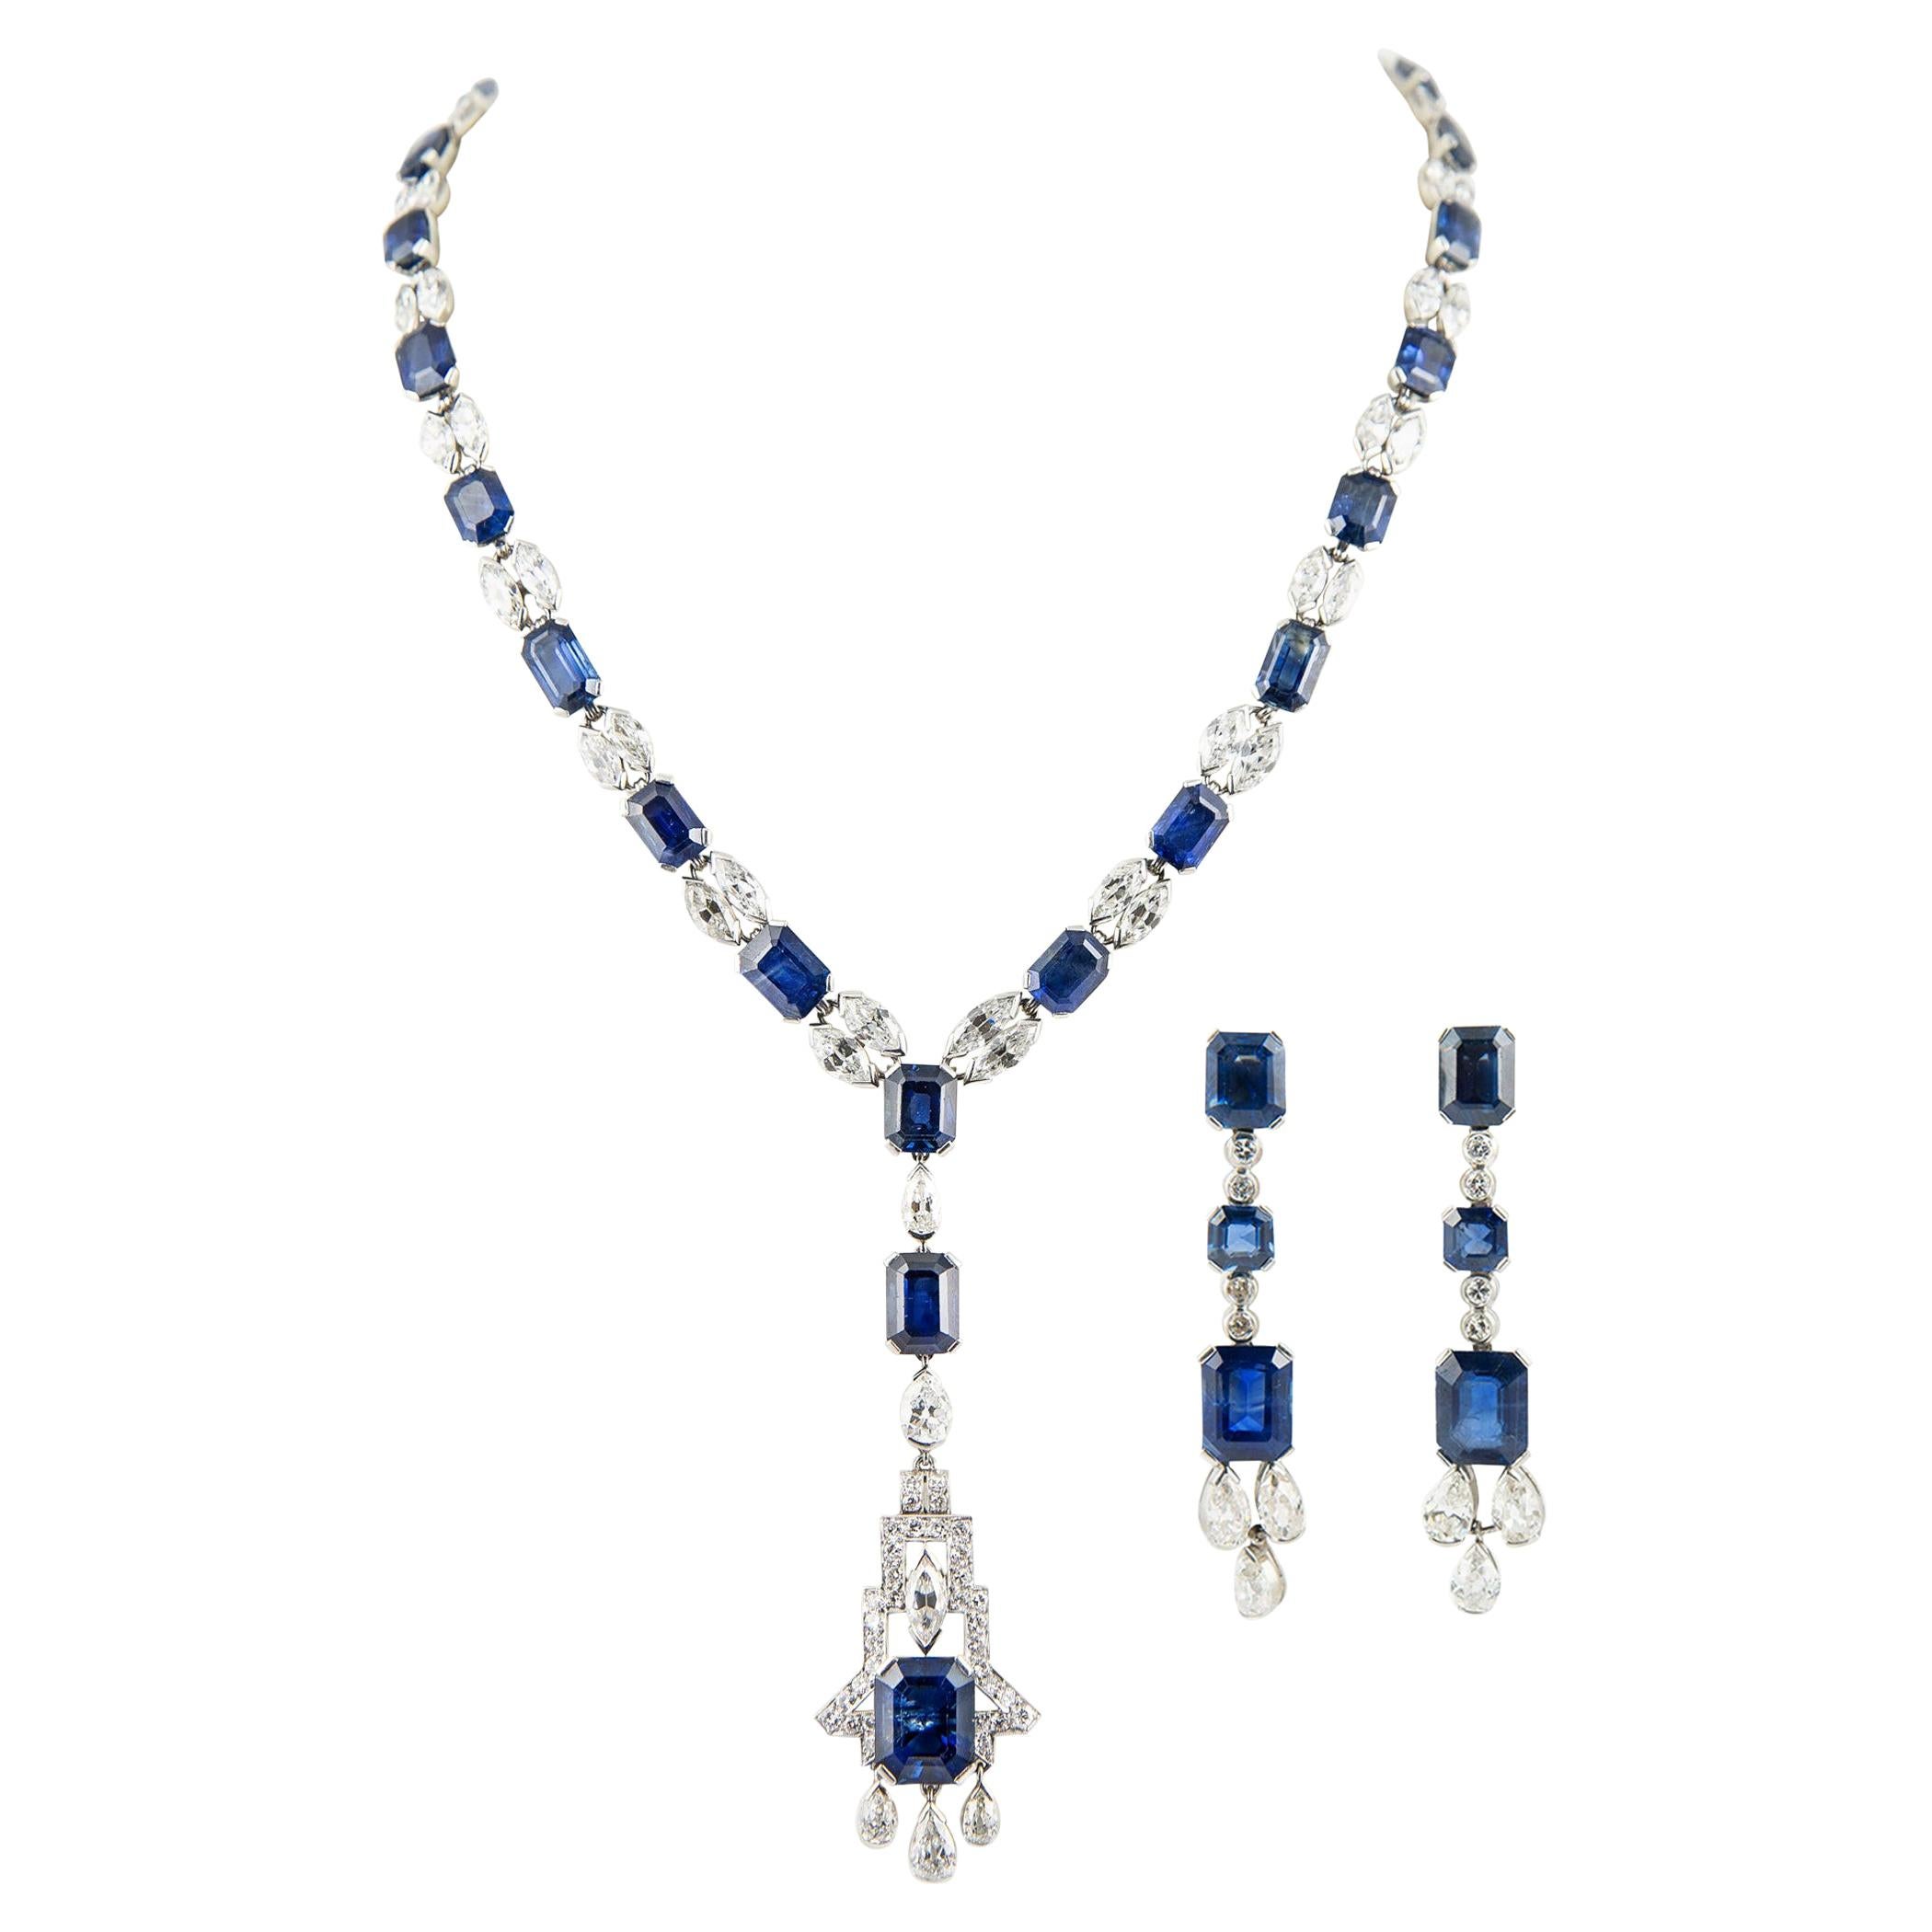 131.05 Carat No Heat Sapphires and Diamonds Necklace and Earrings Platinum